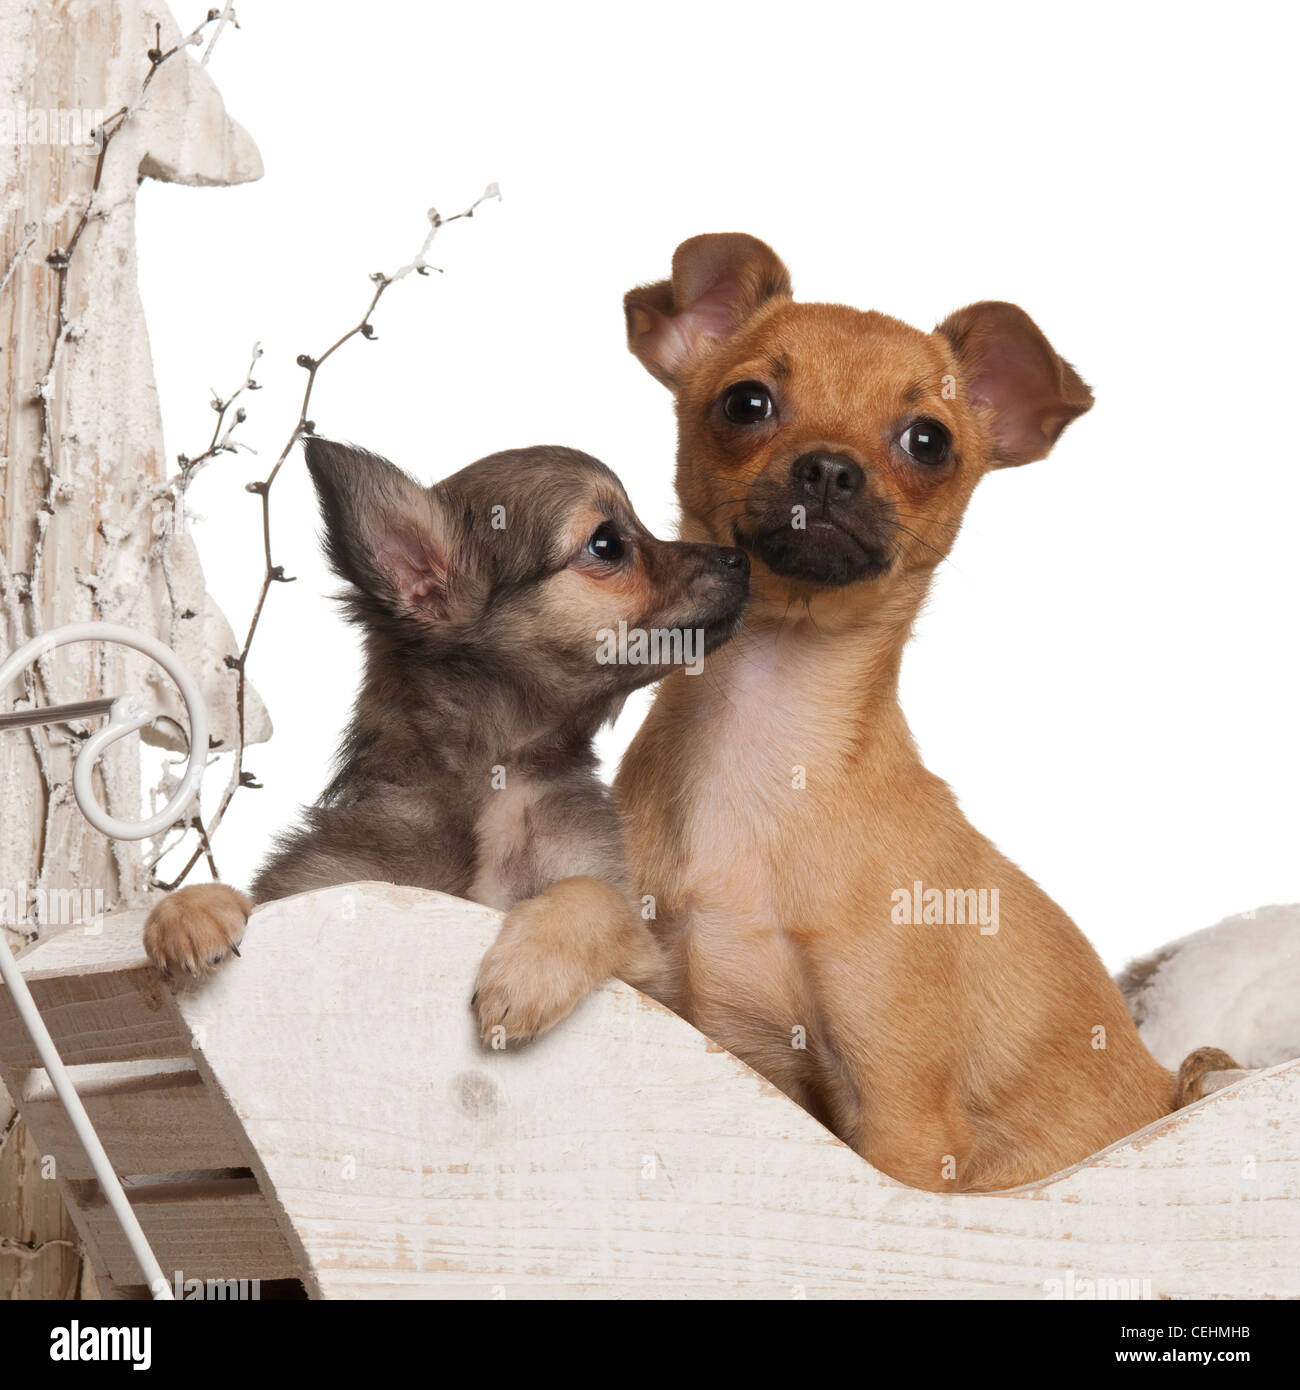 Chihuahua puppies, 4 months old and 3 months old, in Christmas sleigh in front of white background Stock Photo